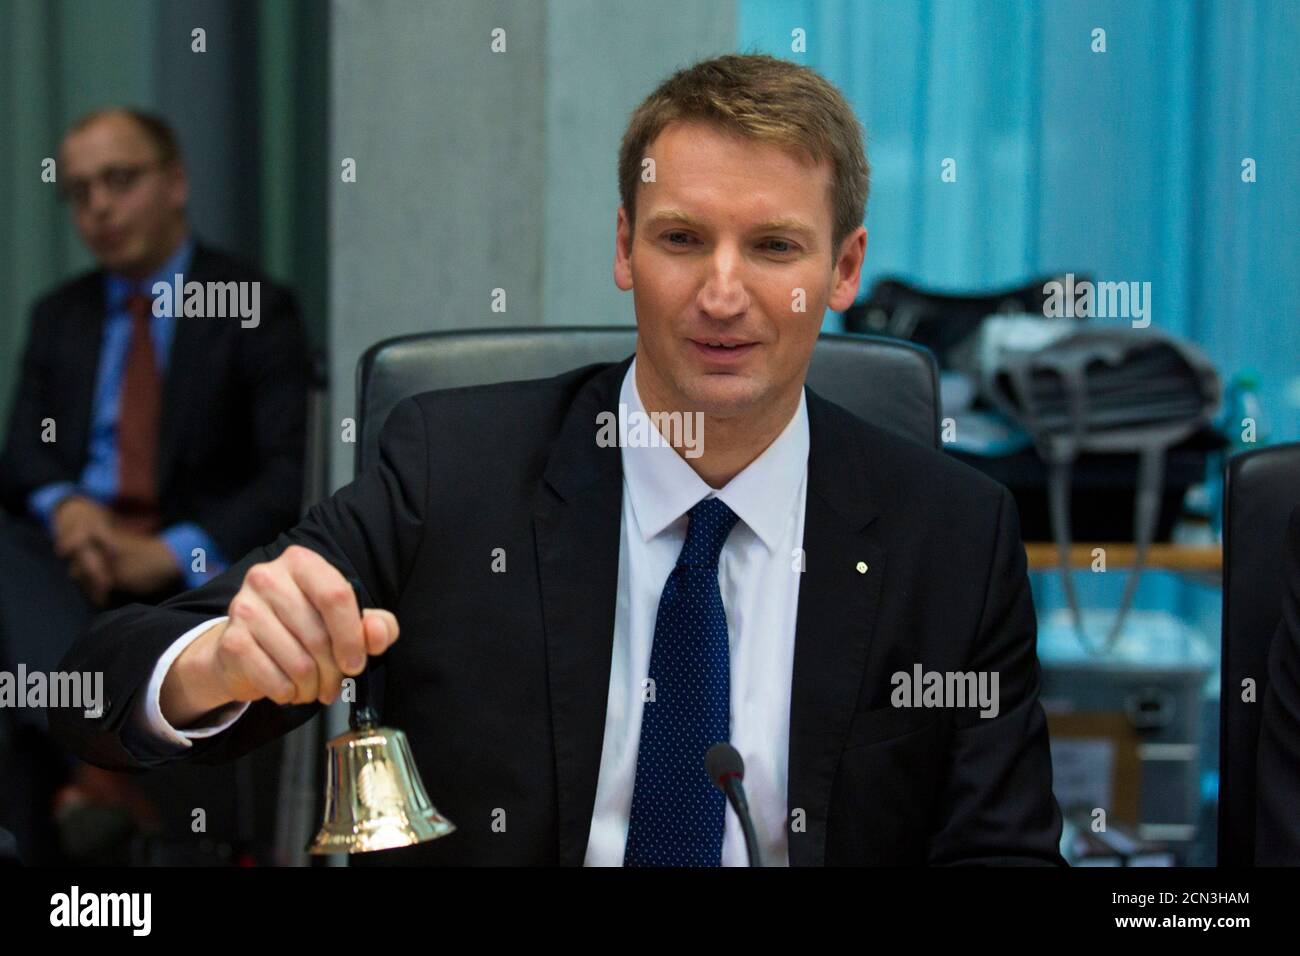 Inquiry commission head Patrick Sensburg rings a bell to start a hearing of a parliamentary inquiry into the NSA's activities in Germany, in Berlin July 3, 2014.  REUTERS/Thomas Peter (GERMANY - Tags: POLITICS) Stock Photo